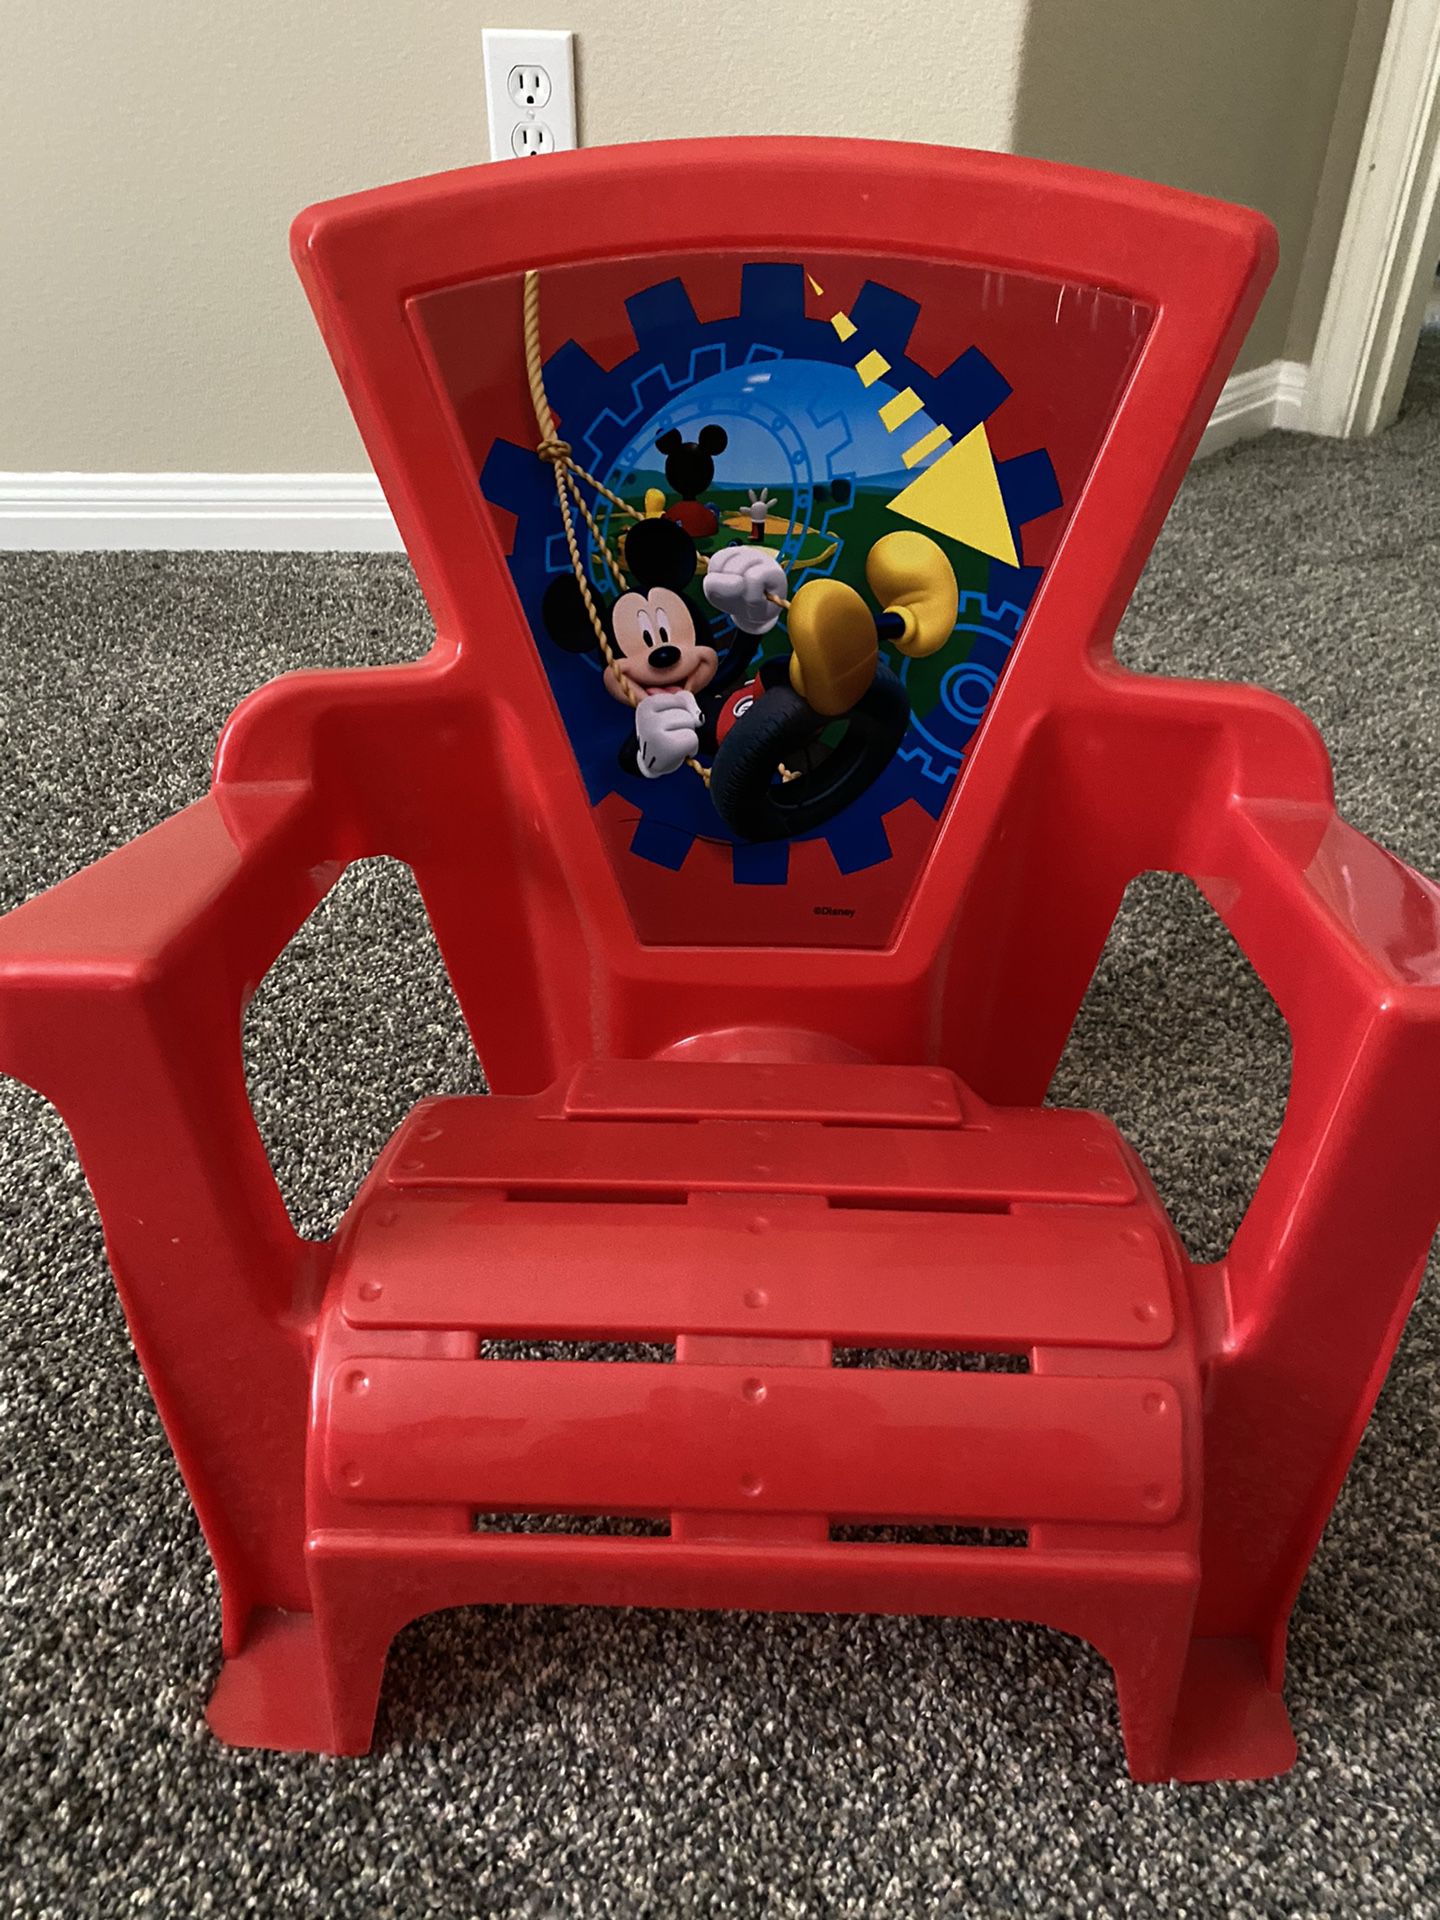 Disney Mickey Mouse red plastic kids chair